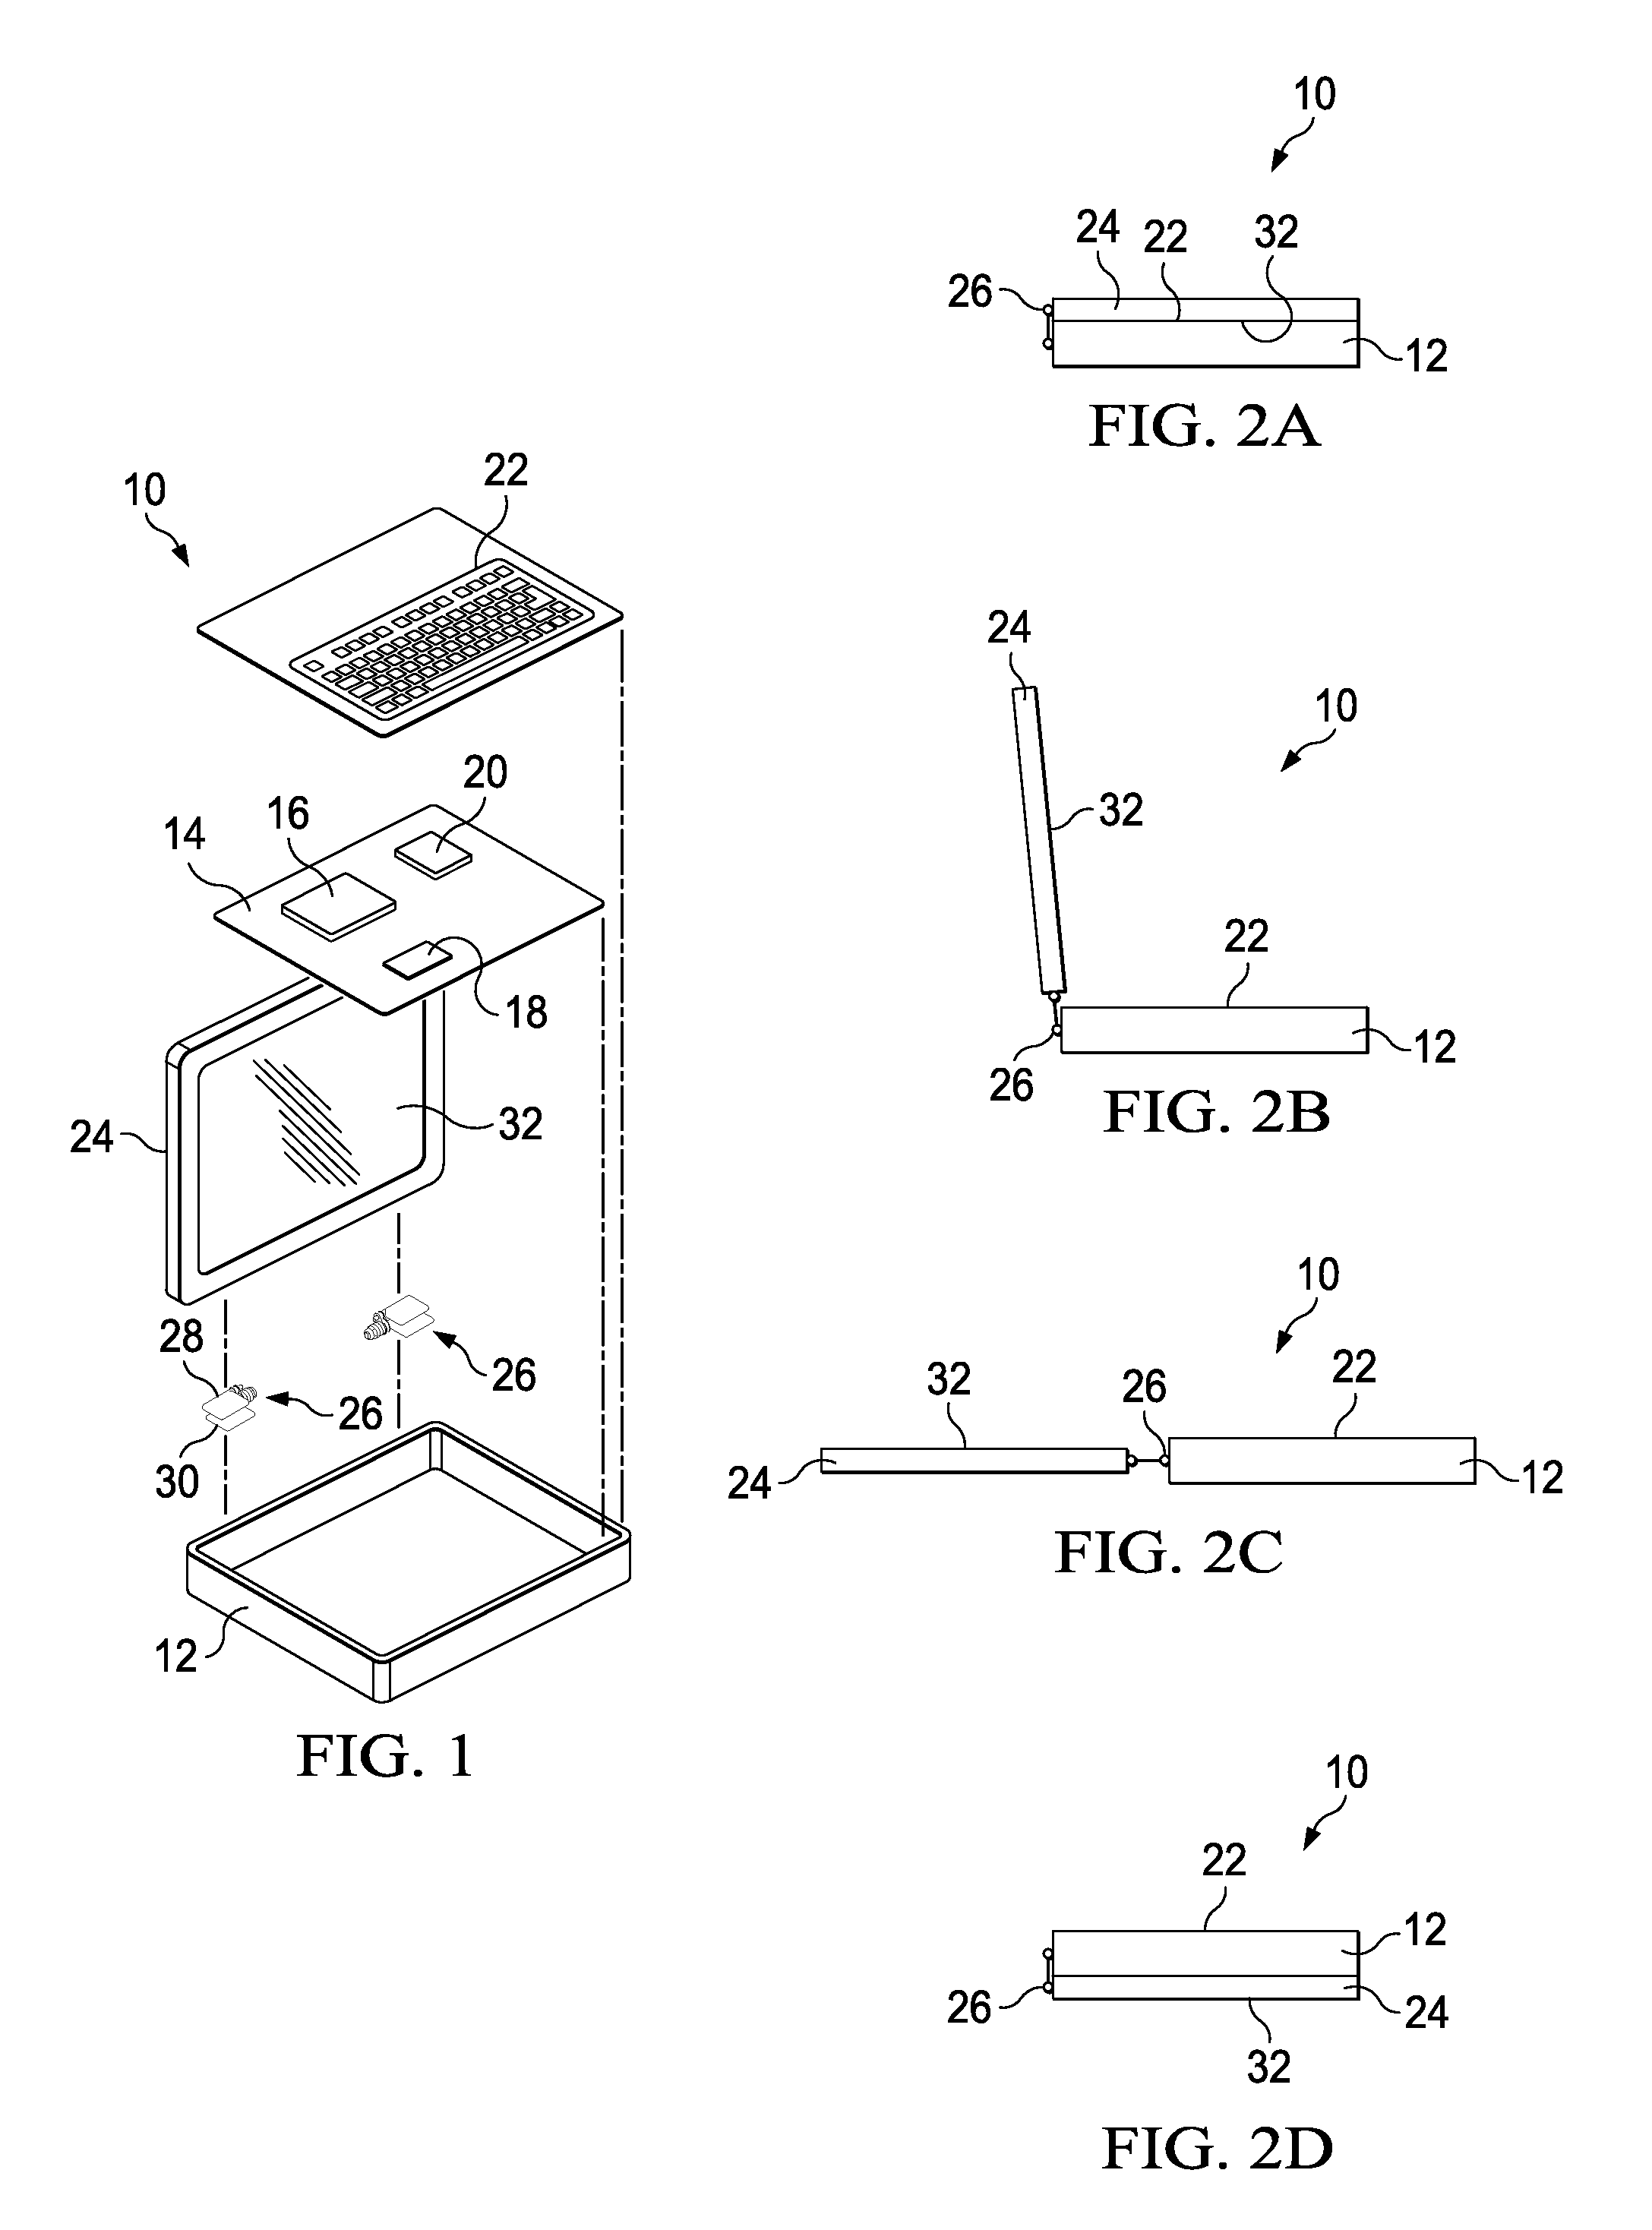 Information handling system housing lid with synchronized motion provided by unequal gears